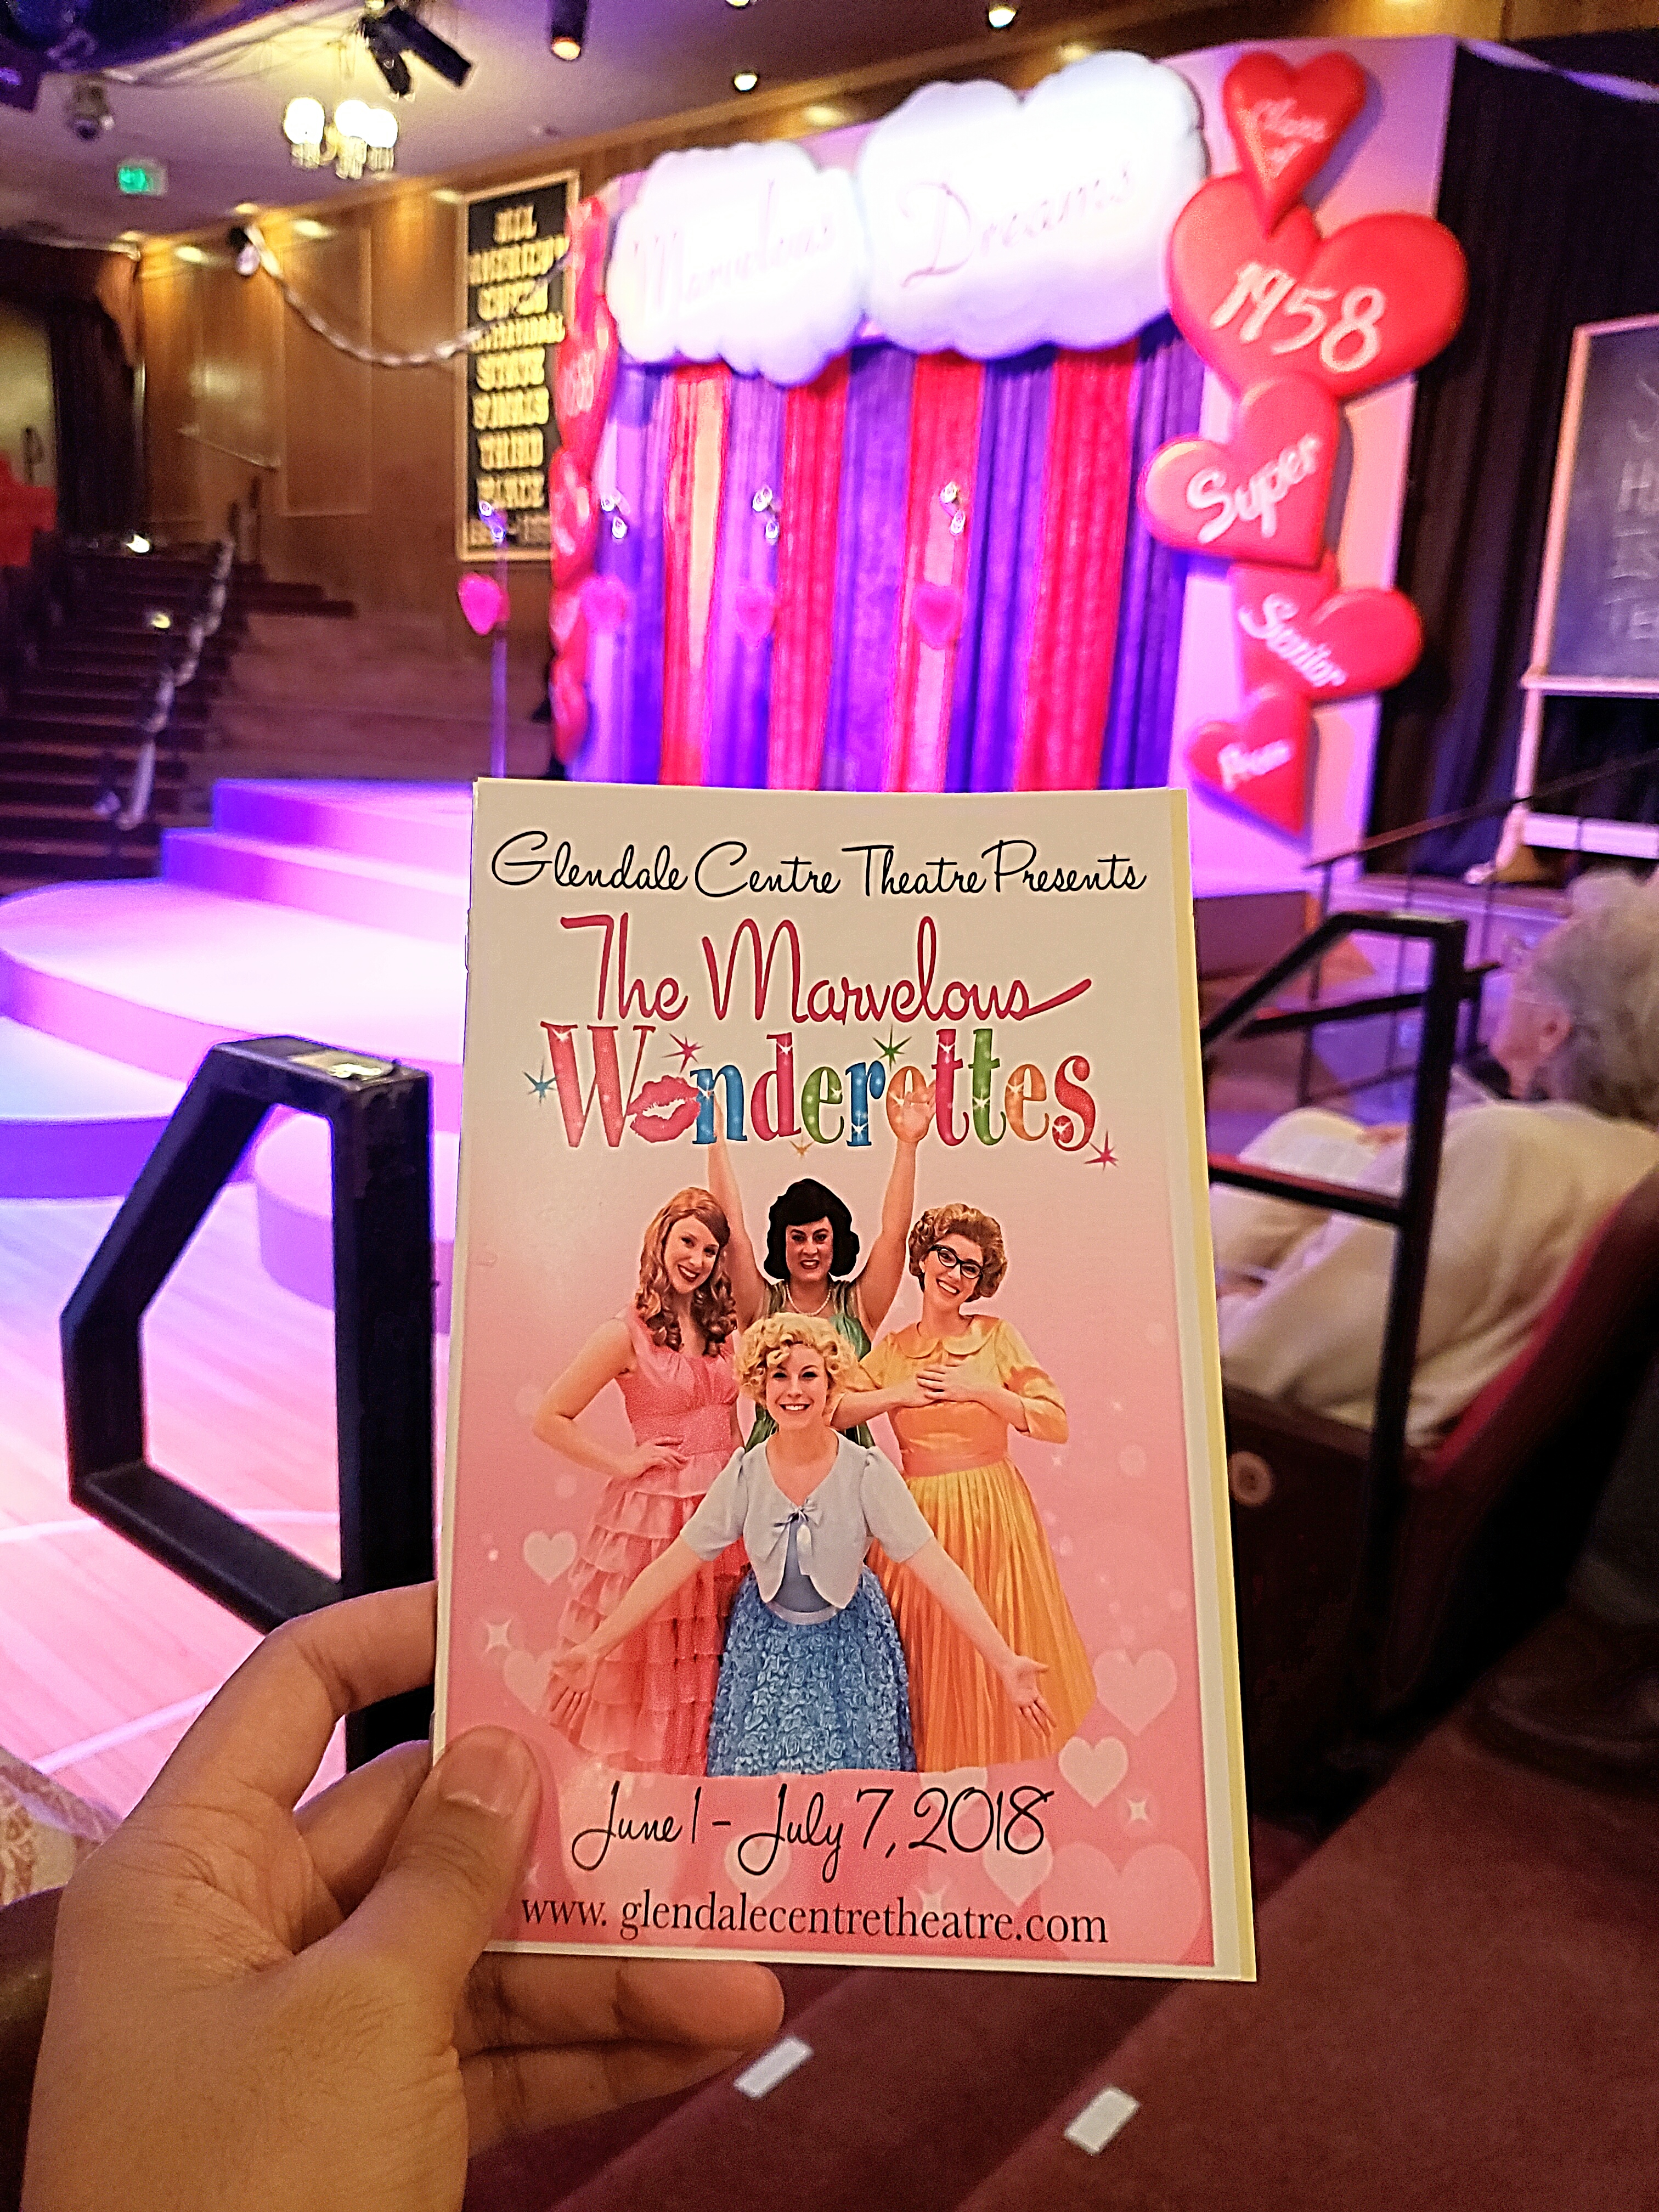 Watched The Marvelous Wonderettes, a jukebox musical featuring retro tight harmony girl group songs. With such incredible voices, it's a shame they used prerecorded accompaniment. Kinda wish there was a plot too.